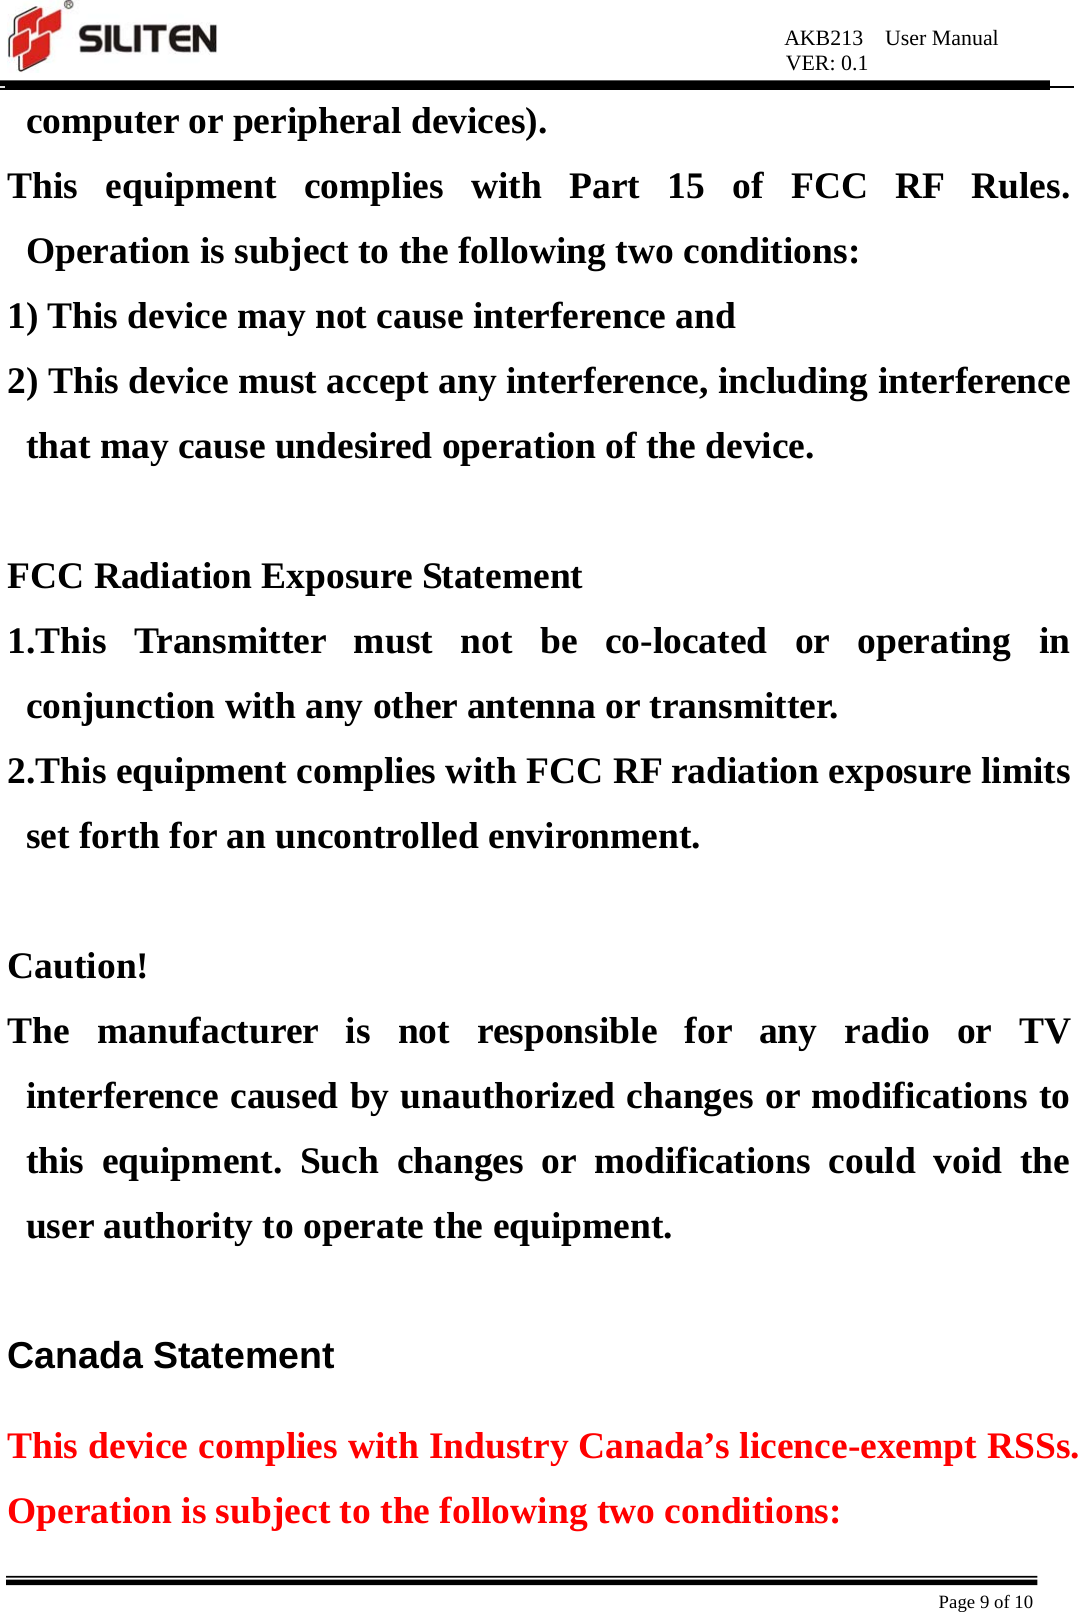 AKB213  User Manual VER: 0.1  Page 9 of 10 computer or peripheral devices).   This equipment complies with Part 15 of FCC RF Rules. Operation is subject to the following two conditions:   1) This device may not cause interference and   2) This device must accept any interference, including interference that may cause undesired operation of the device.    FCC Radiation Exposure Statement   1.This Transmitter must not be co-located or operating in conjunction with any other antenna or transmitter.   2.This equipment complies with FCC RF radiation exposure limits set forth for an uncontrolled environment.    Caution!  The manufacturer is not responsible for any radio or TV interference caused by unauthorized changes or modifications to this equipment. Such changes or modifications could void the user authority to operate the equipment.  Canada Statement   This device complies with Industry Canada’s licence-exempt RSSs. Operation is subject to the following two conditions: 